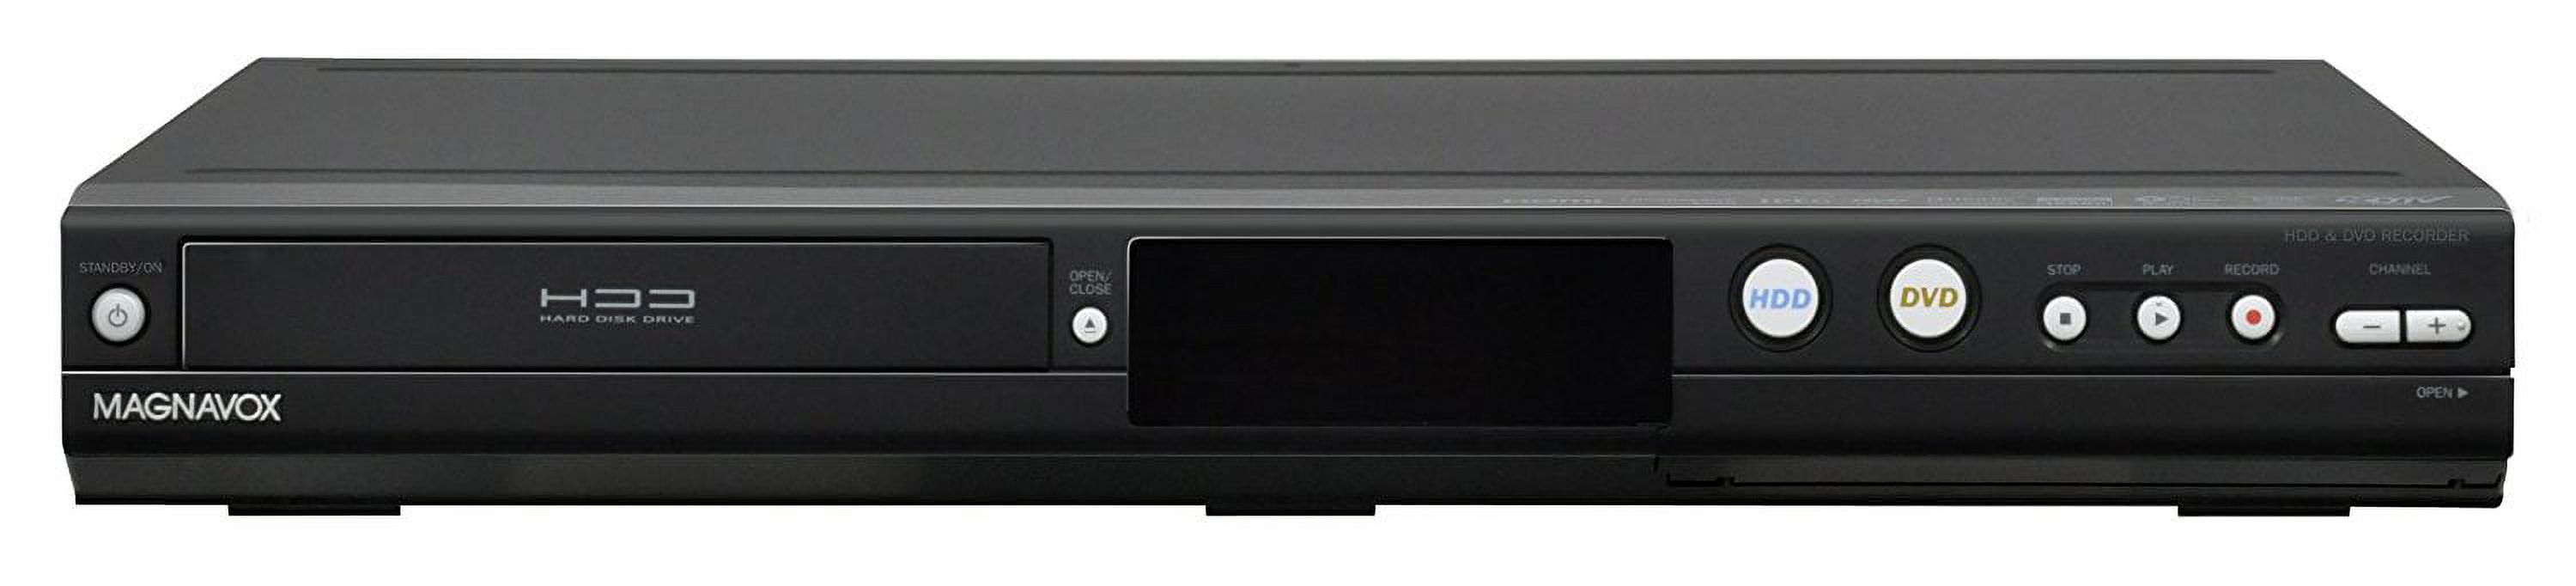 Magnavox MDR533H 1 Disc(s) DVD Player/Recorder, 1080p, 320 GB HDD, Black - image 2 of 3